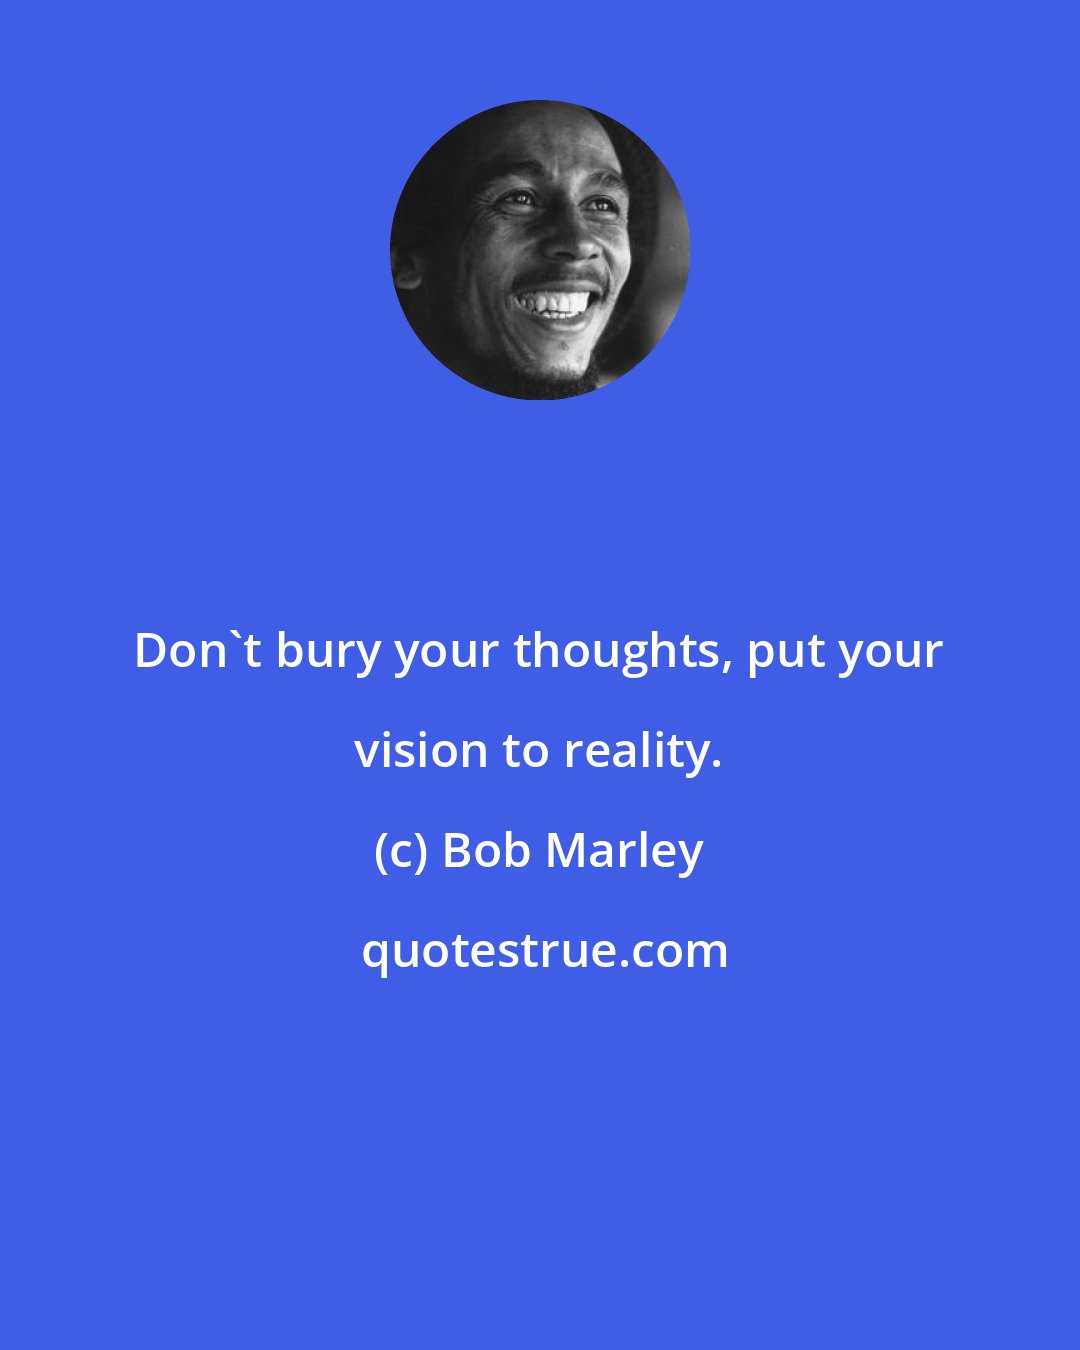 Bob Marley: Don't bury your thoughts, put your vision to reality.